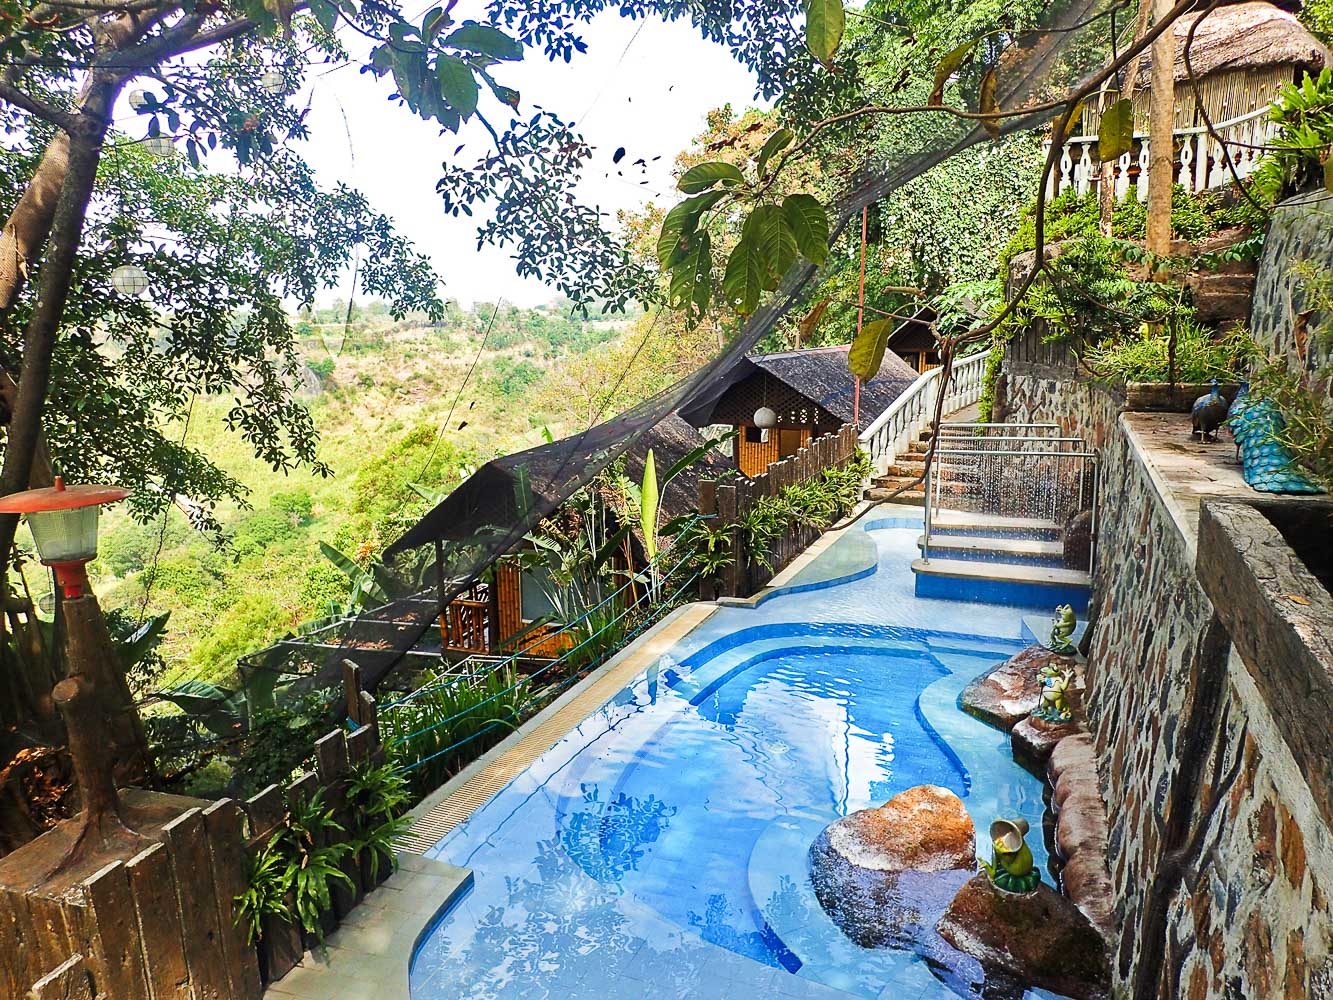 MOUNTAINSIDE SPA. Take a dip and relax in one of Luljetta's Hanging Gardens and Spa's pools and enjoy the view that comes with it. Luljetta's is beautifully built along one of Antipolo's ridges. All photos by or courtesy of Rhea Claire Madarang  